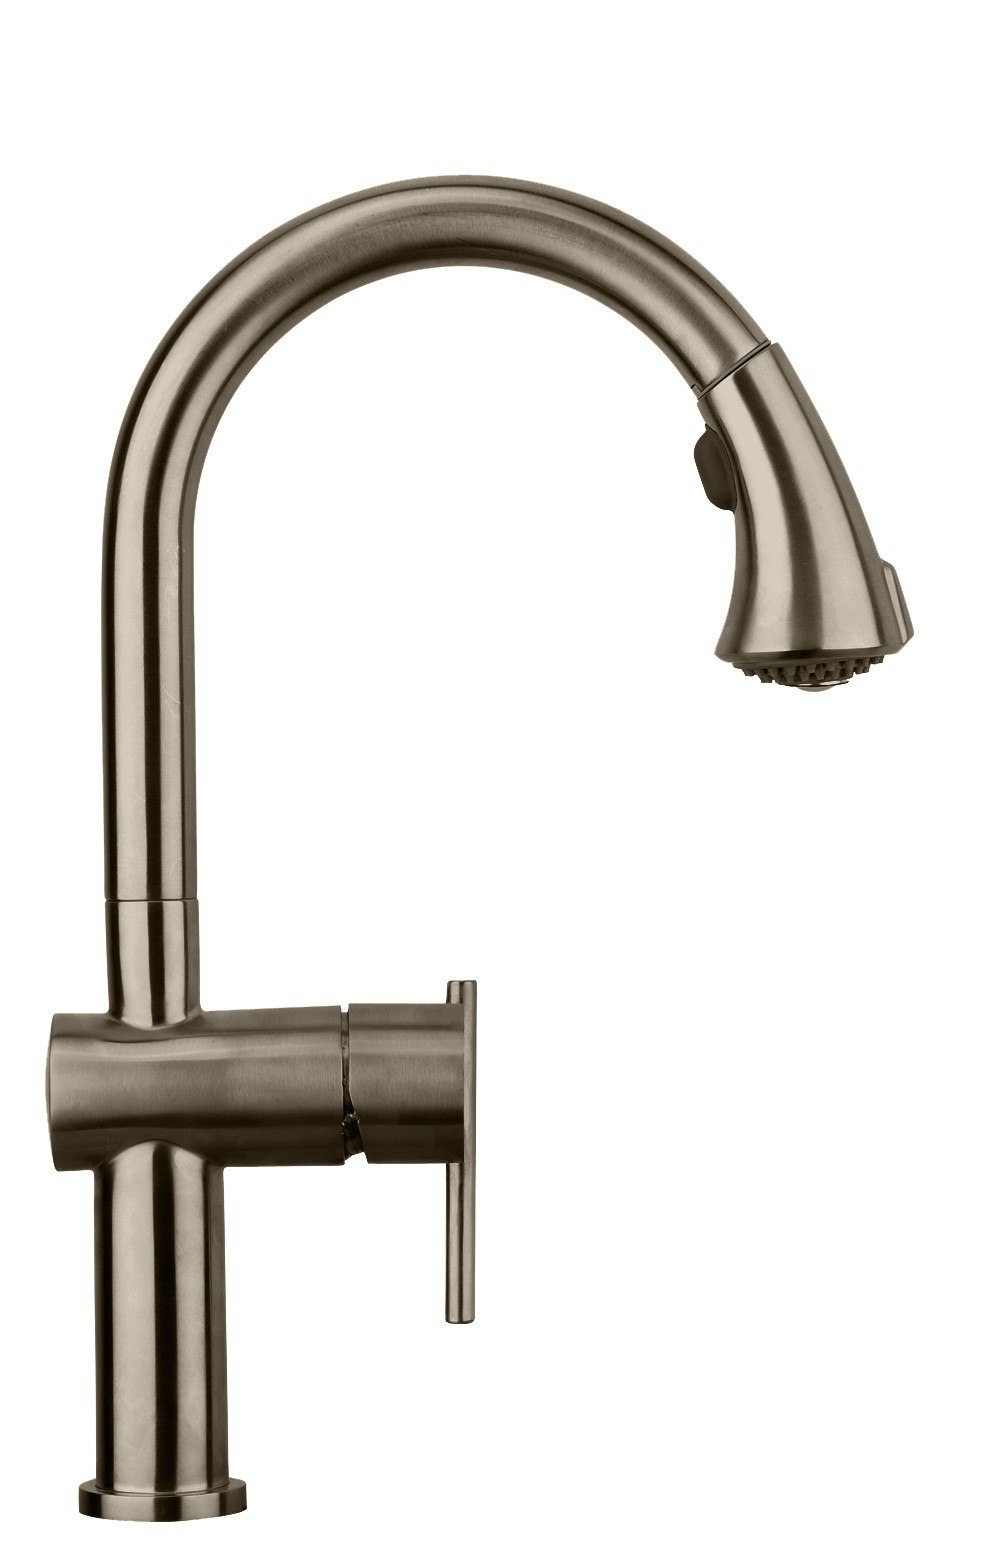 WHITEHAUS WHS1971-SK-BSS WATERHAUS LEAD FREE, SINGLE-HOLE FAUCET WITH GOOSENECK SWIVEL SPOUT AND PULL DOWN SPRAY HEAD